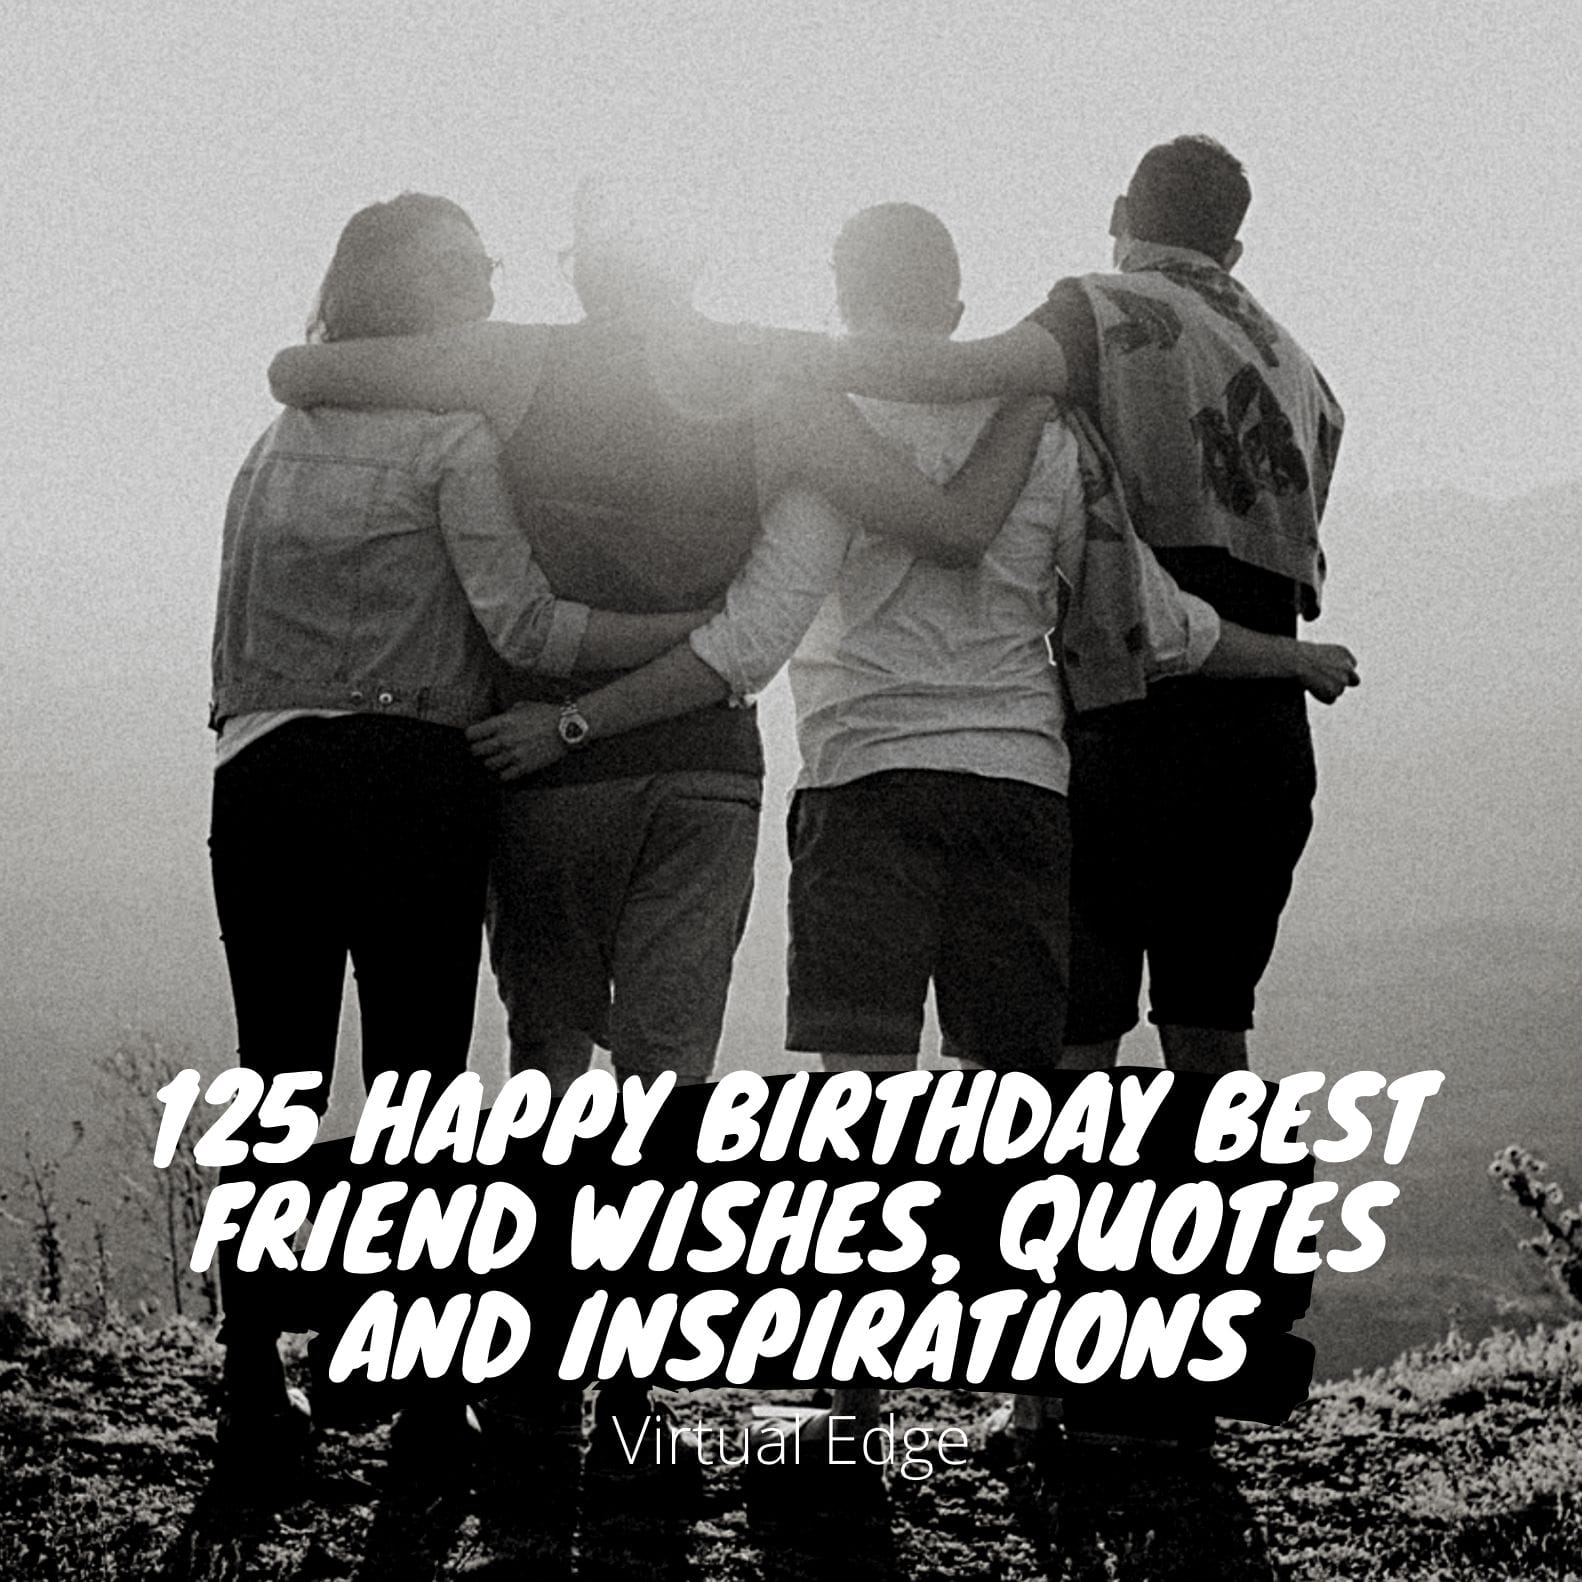 125 Happy Birthday Best Friend Wishes, Quotes and Inspirations